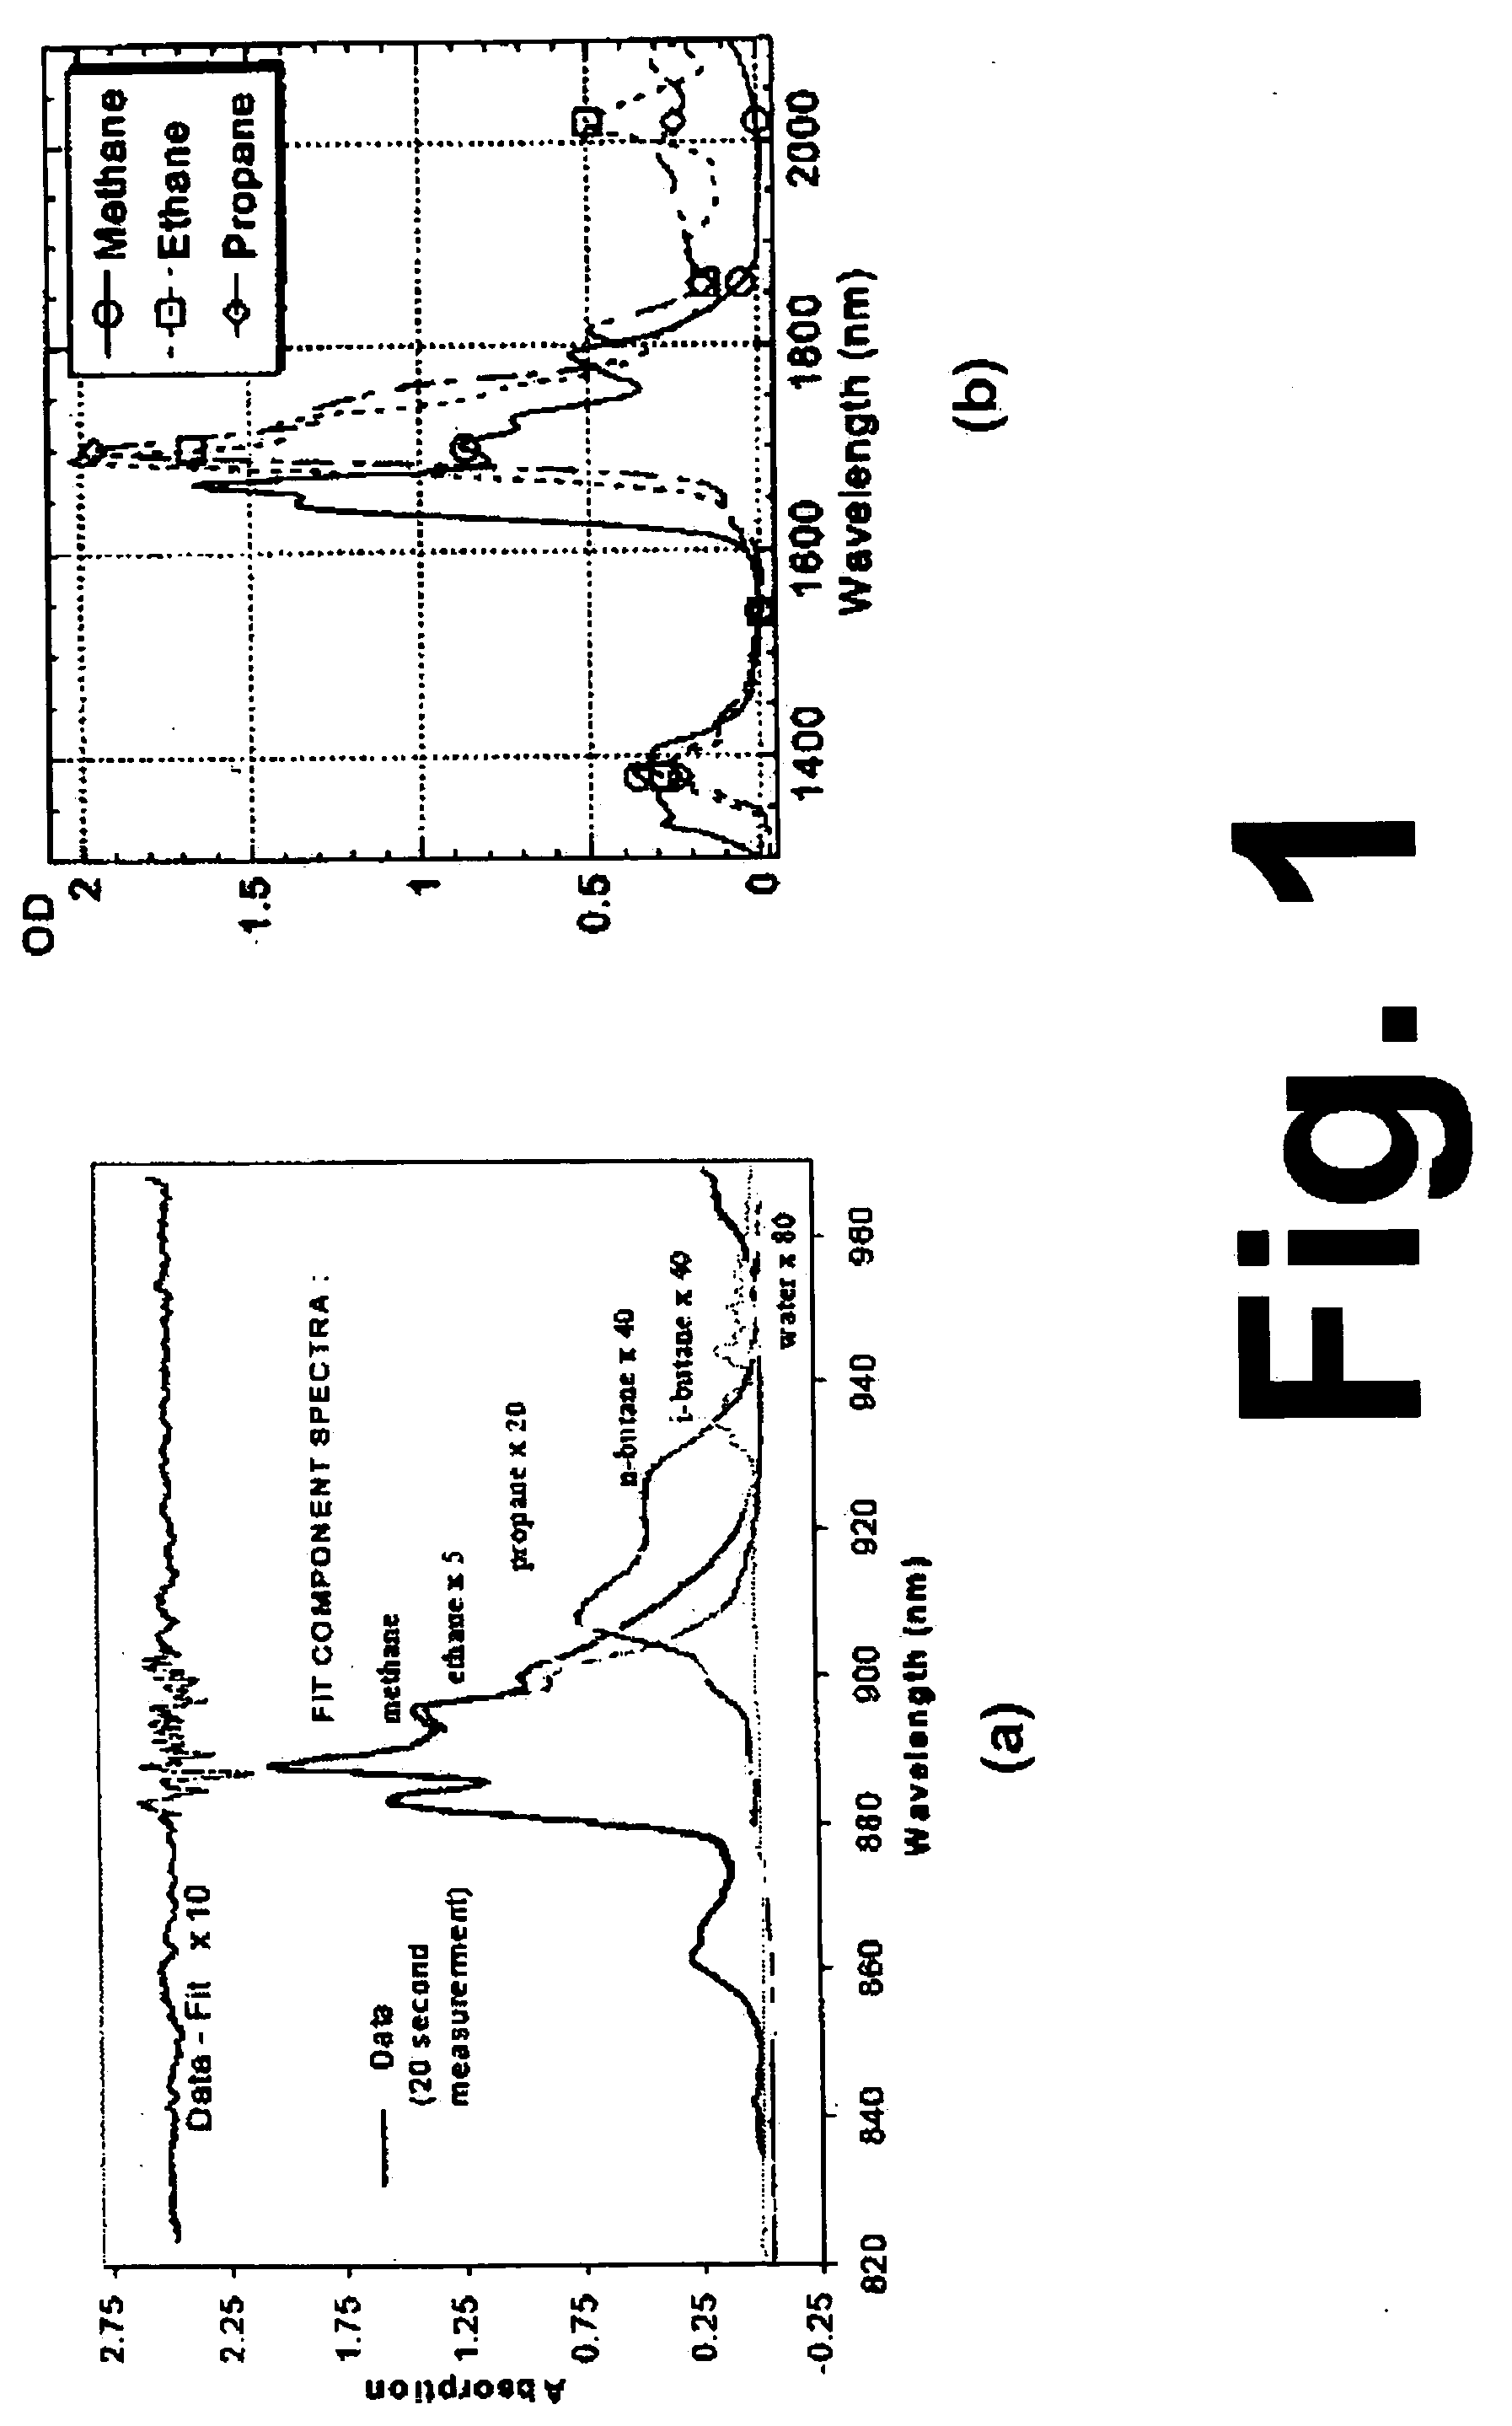 Method and apparatus for optically measuring the heating value of a multi-component fuel gas using nir absorption spectroscopy